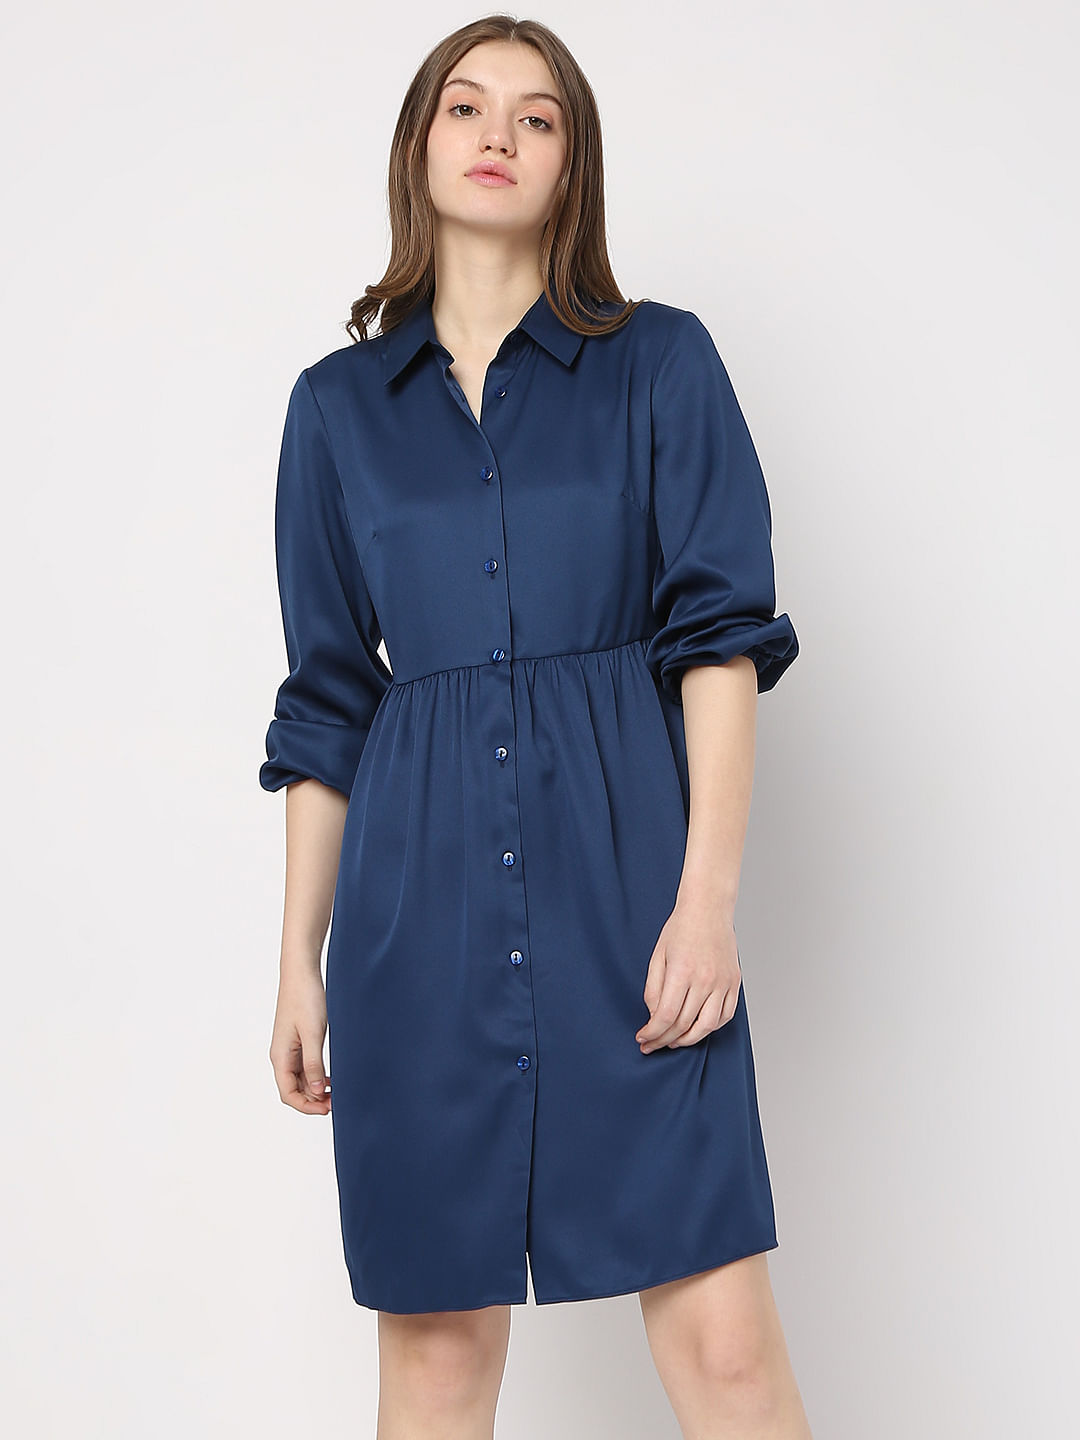 Nuon by Westside Solid Black Button Down Denim Dress